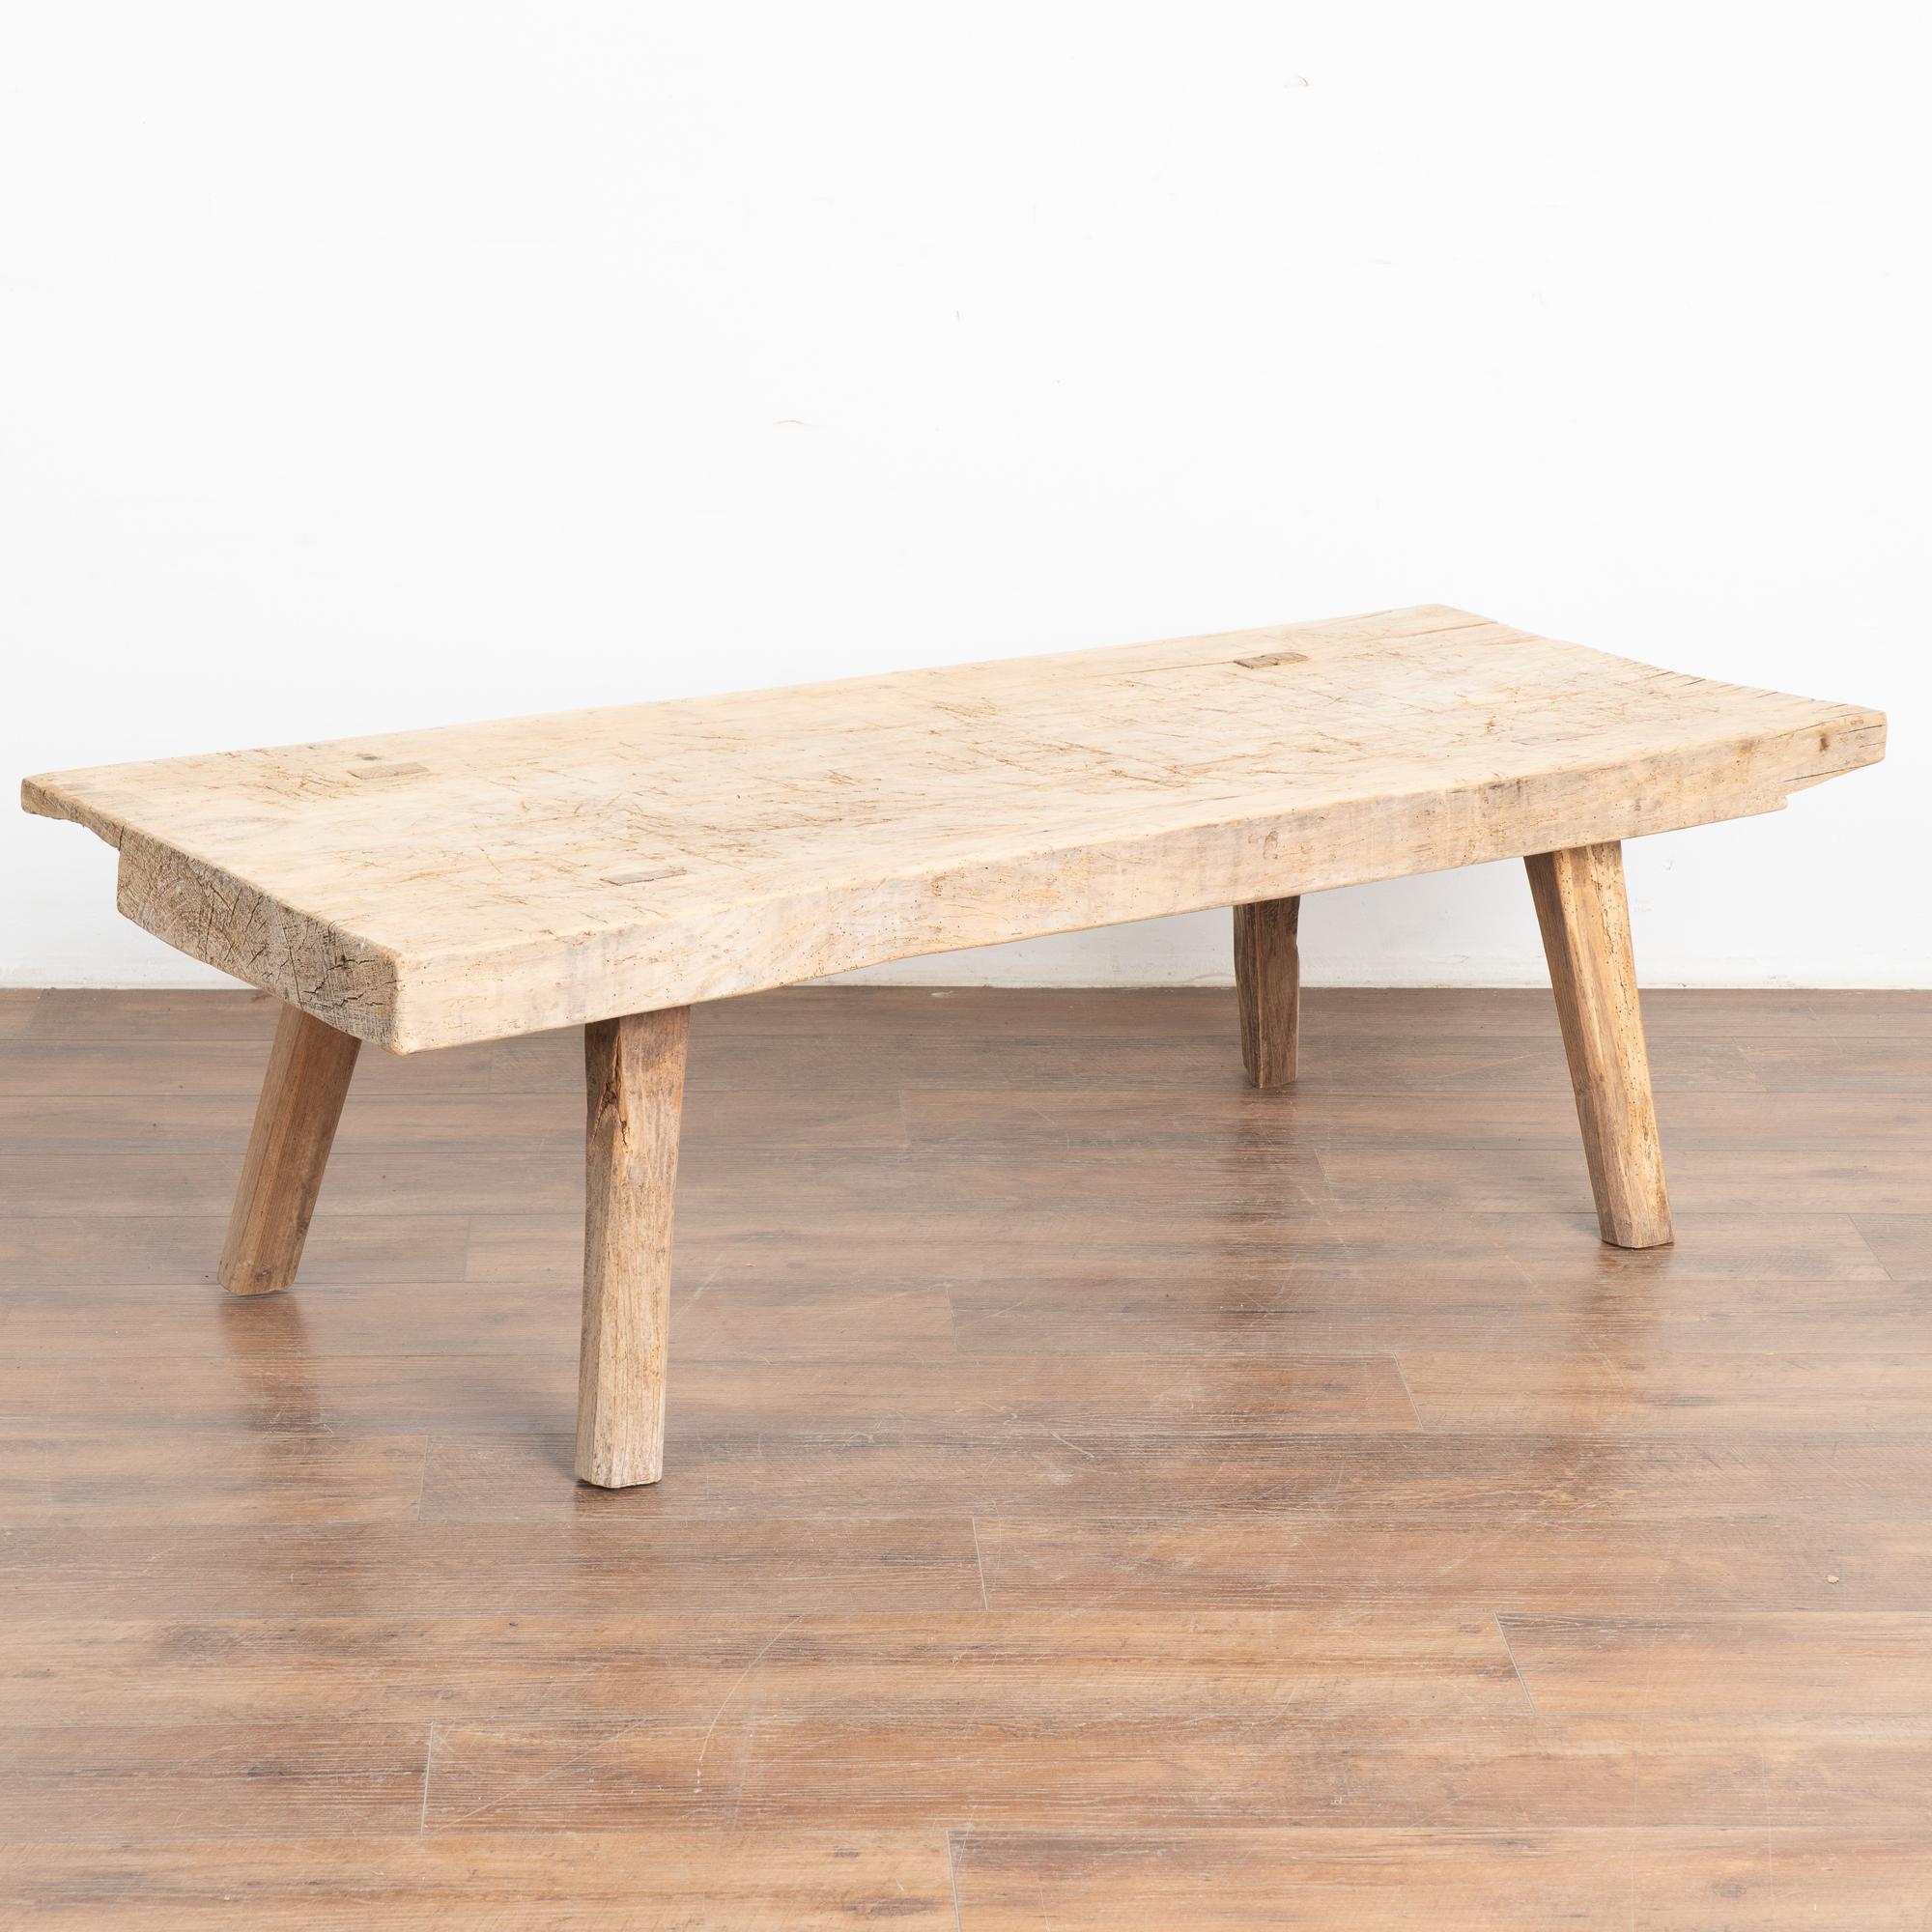 The appeal of this coffee table comes from the rustic wood top that originally served as a work table and rests on original thick peg legs. 
Note the scratches, nicks, gouges, stains and old cracks that all combine to build the depth of character